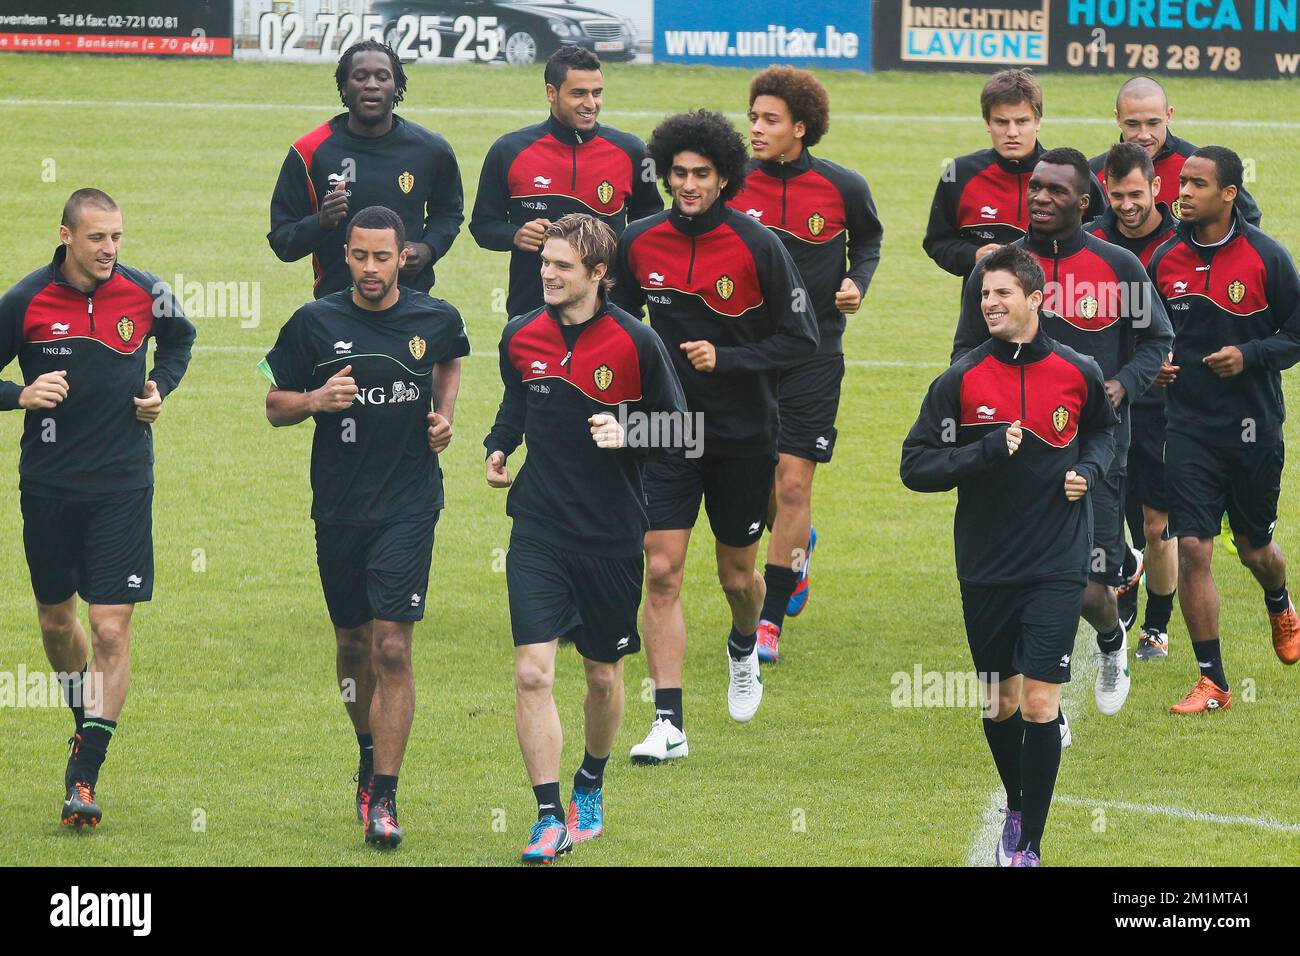 20120523 - ZAVENTEM, BELGIUM: Belgian players pictured during a training session of the Red Devils, the Belgian national soccer team, in Zaventem, Wednesday 23 May 2012. The team is preparing for a friendly game against Montenegro later this week on 25 May. BELGA PHOTO BRUNO FAHY Stock Photo